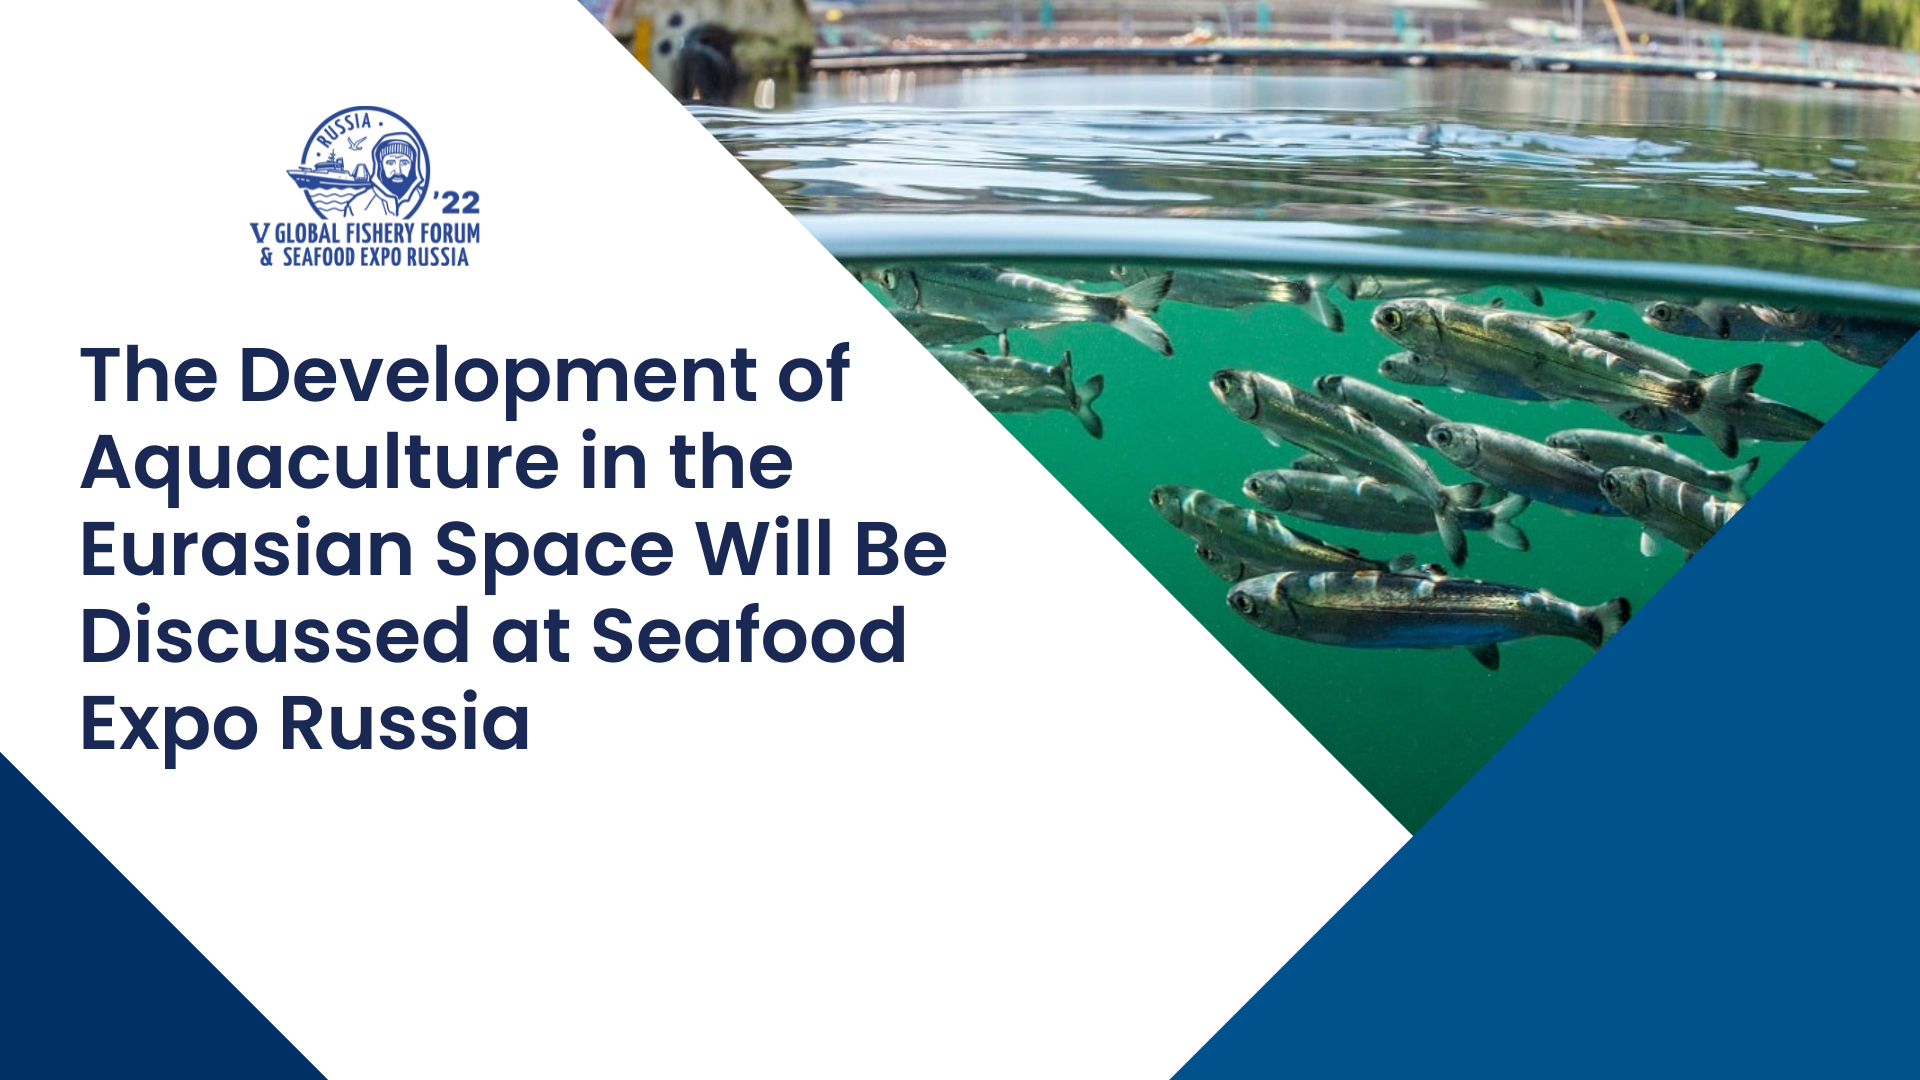 The Development of Aquaculture in the Eurasian Space Will Be Discussed at Seafood Expo Russia